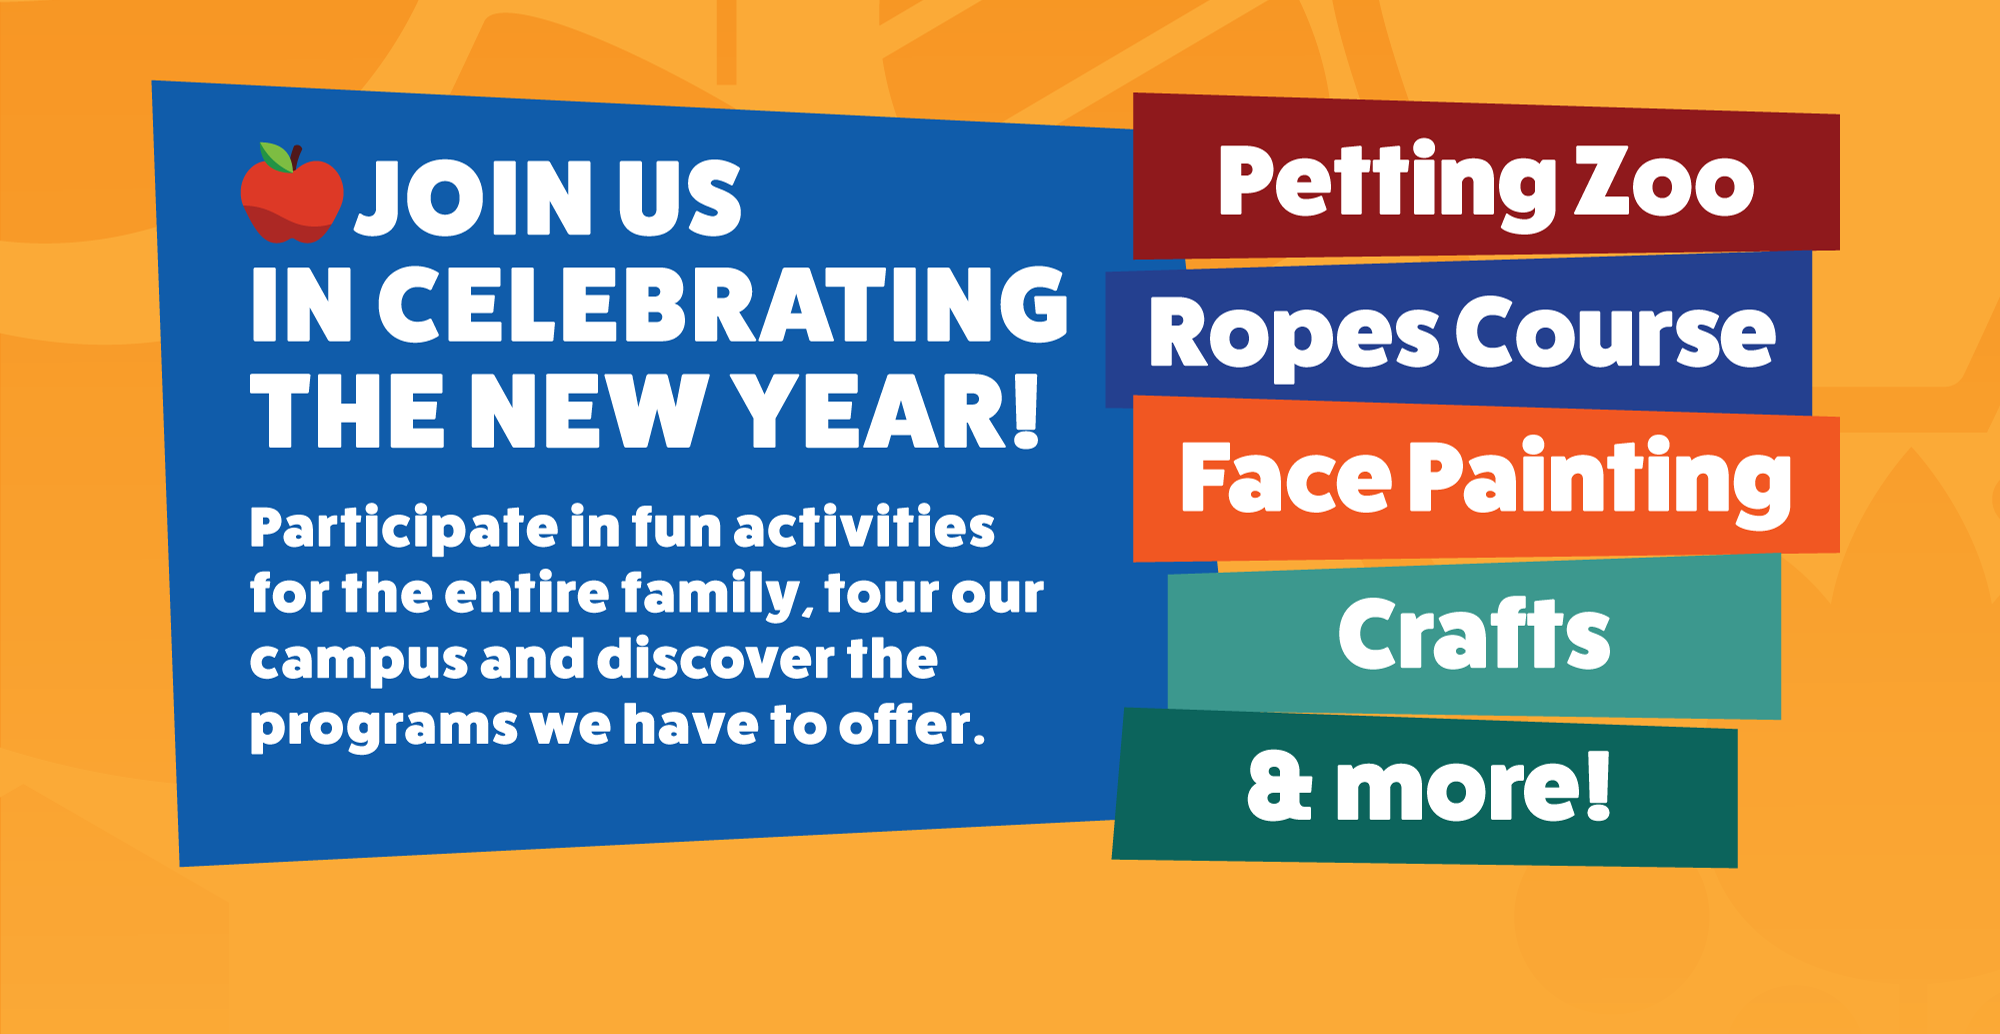 •JOIN US IN CELEBRATING THE NEW YEAR! Participate in fun activities for the entire family, tour our campus and discover the programs we have to offer. Petting Zoo Ropes Course Face Painting Crafts & more!